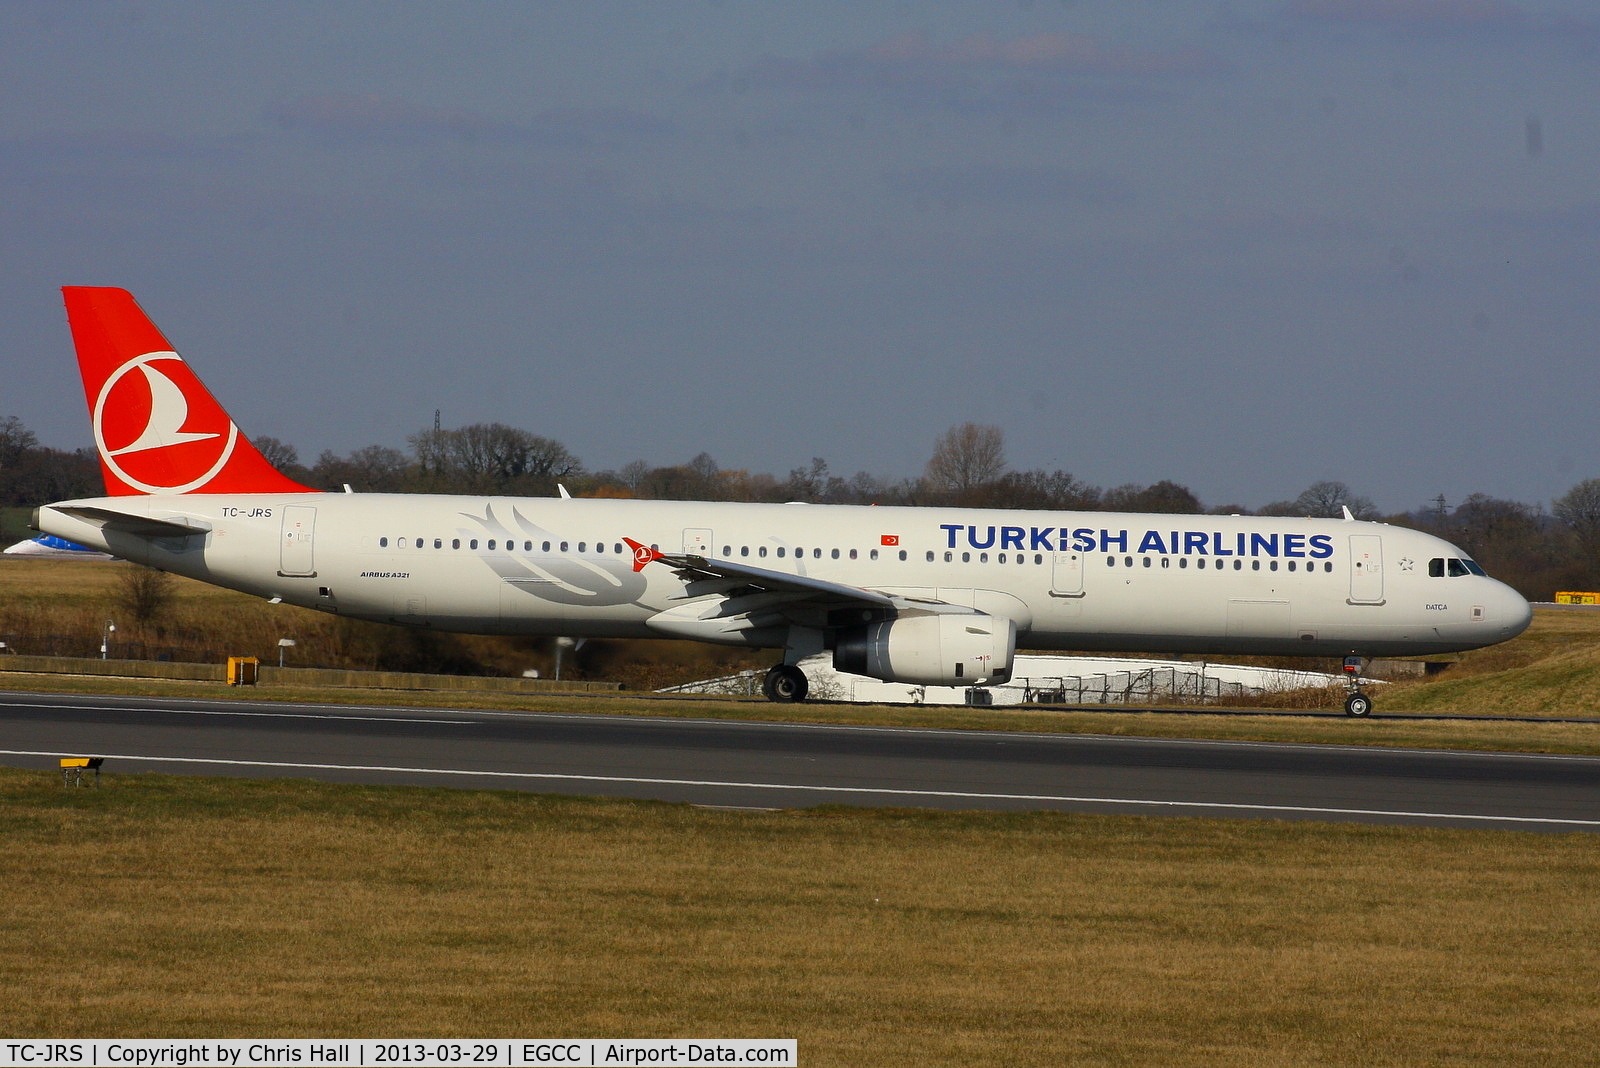 TC-JRS, 2011 Airbus A321-231 C/N 4761, Turkish Airlines